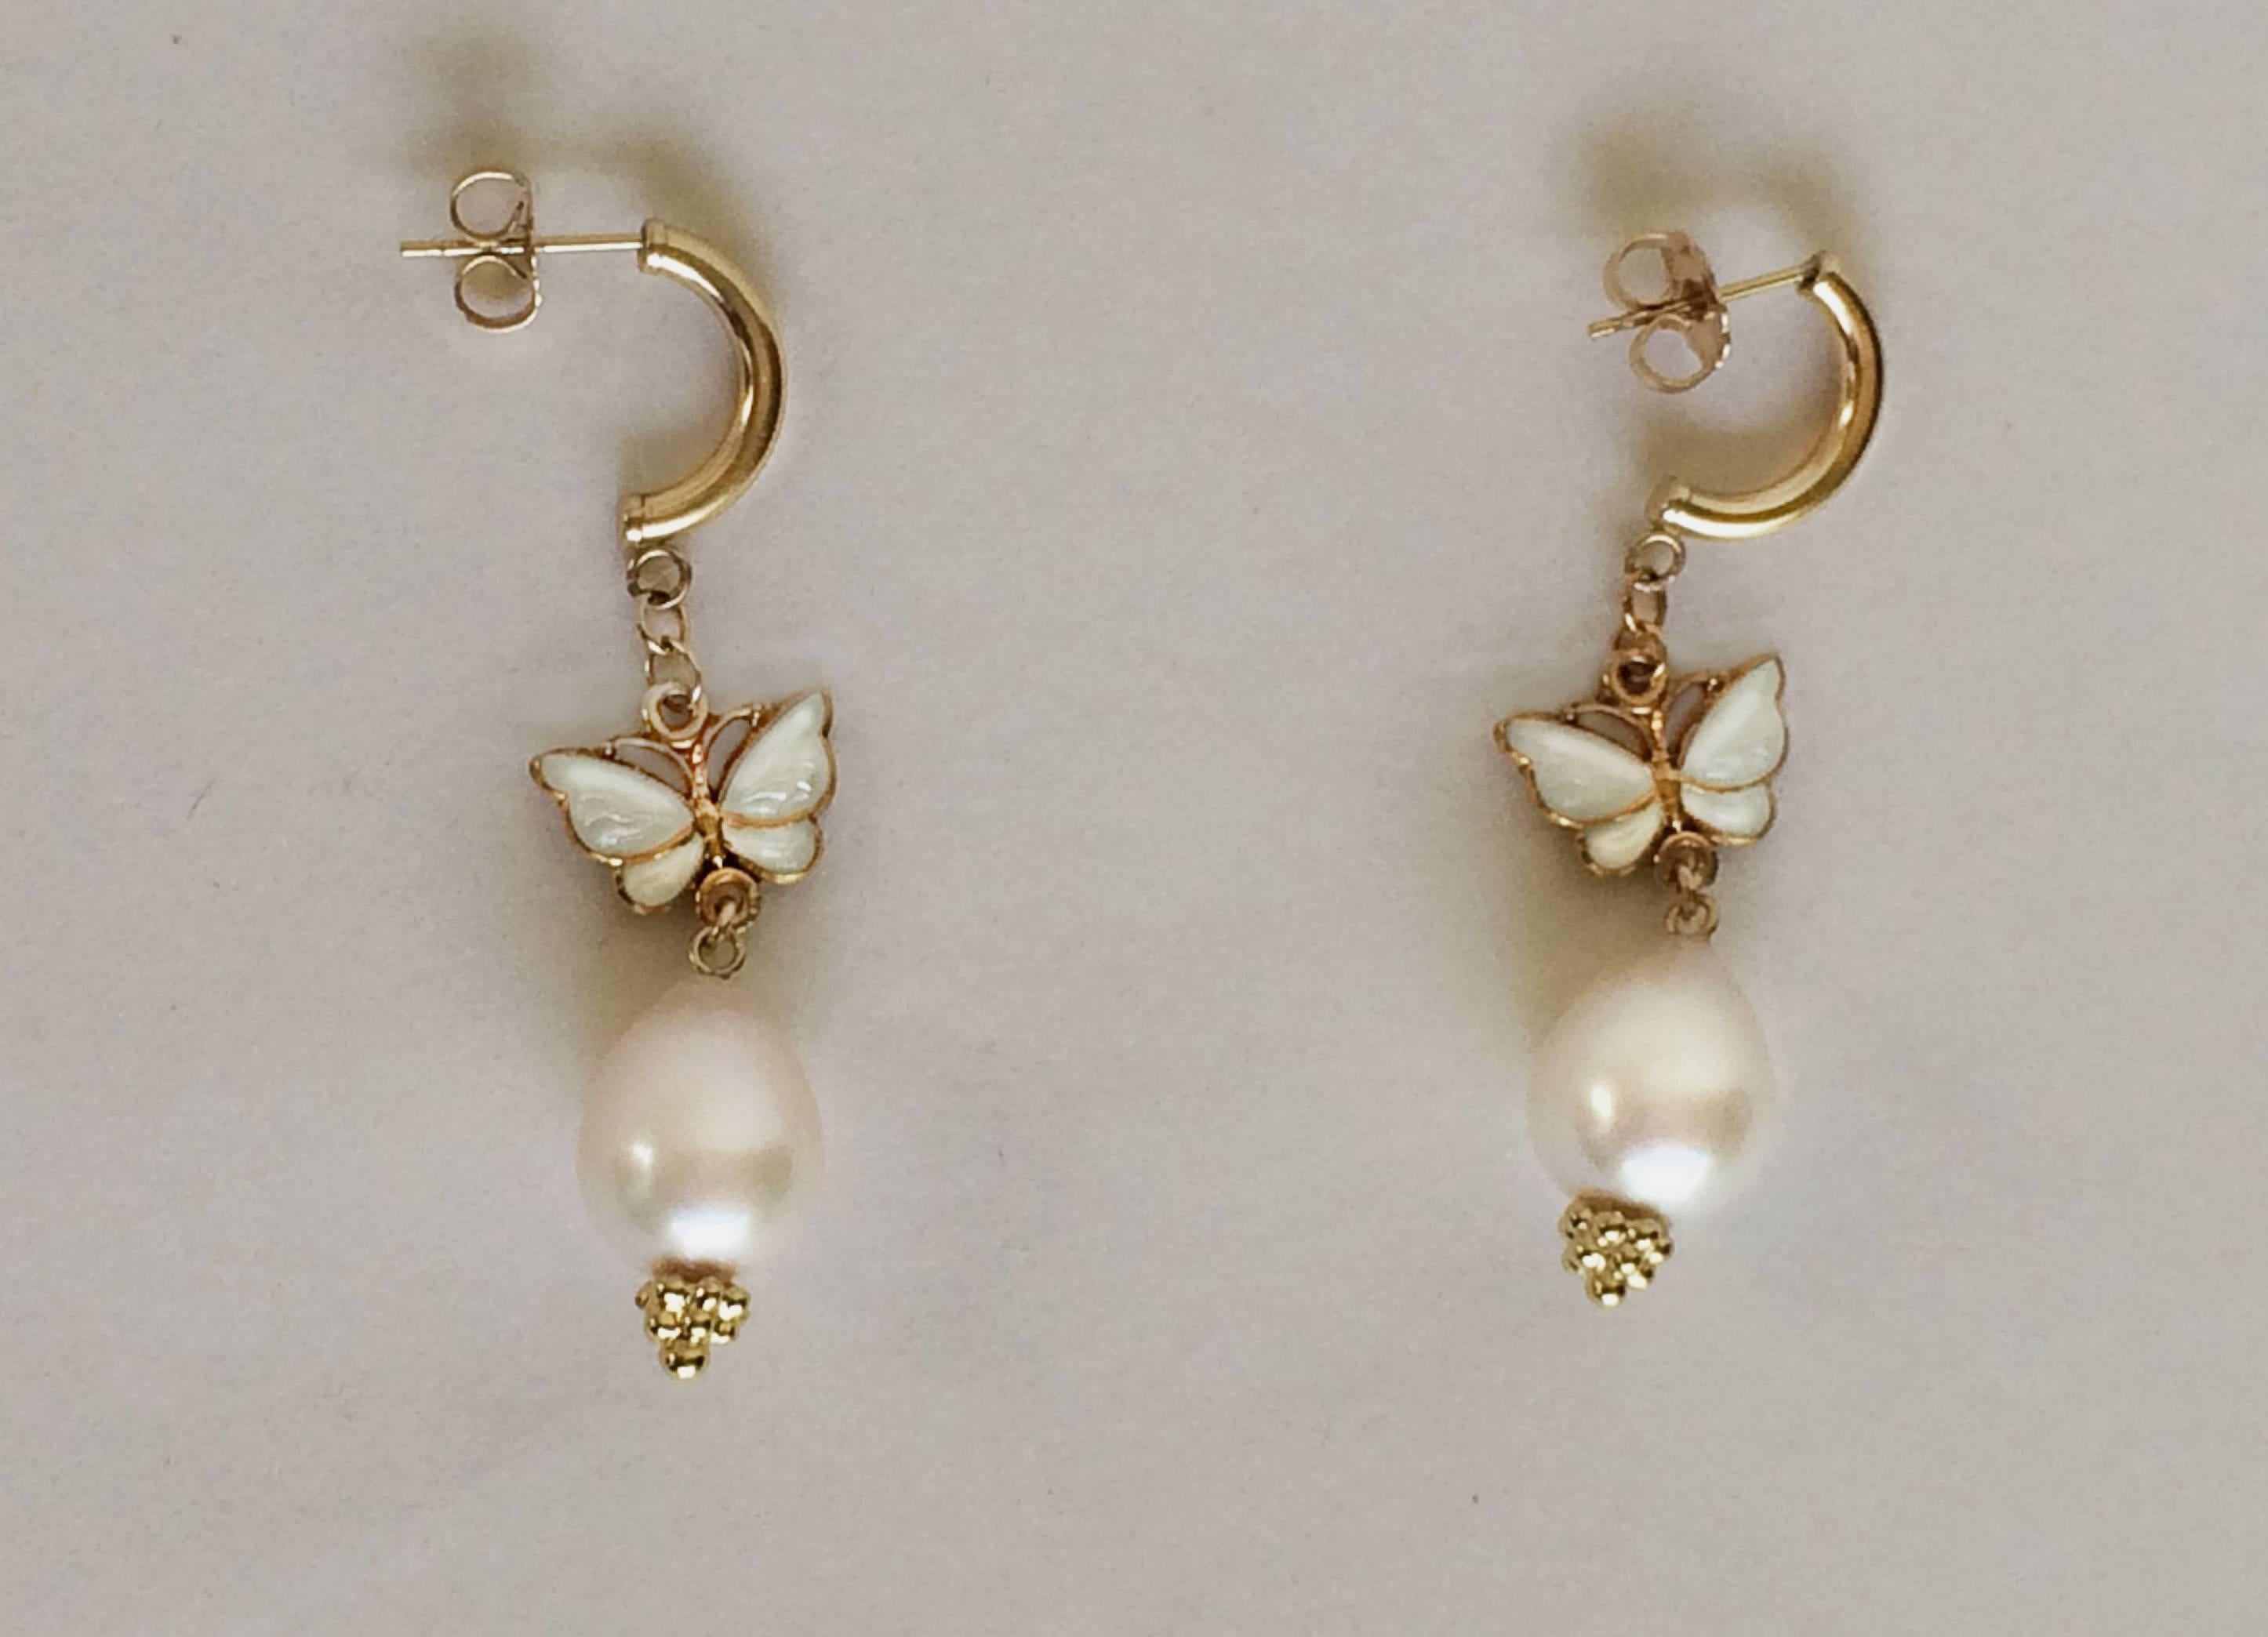 These earrings are perfect for a beautiful summer day out.  A vintage butterfly (c.1950s) with fine white enamel hangs from a 14k gold earring and finished with a large drop shaped pearl. The earrings hangs 1.5 inches, highlighting the face and